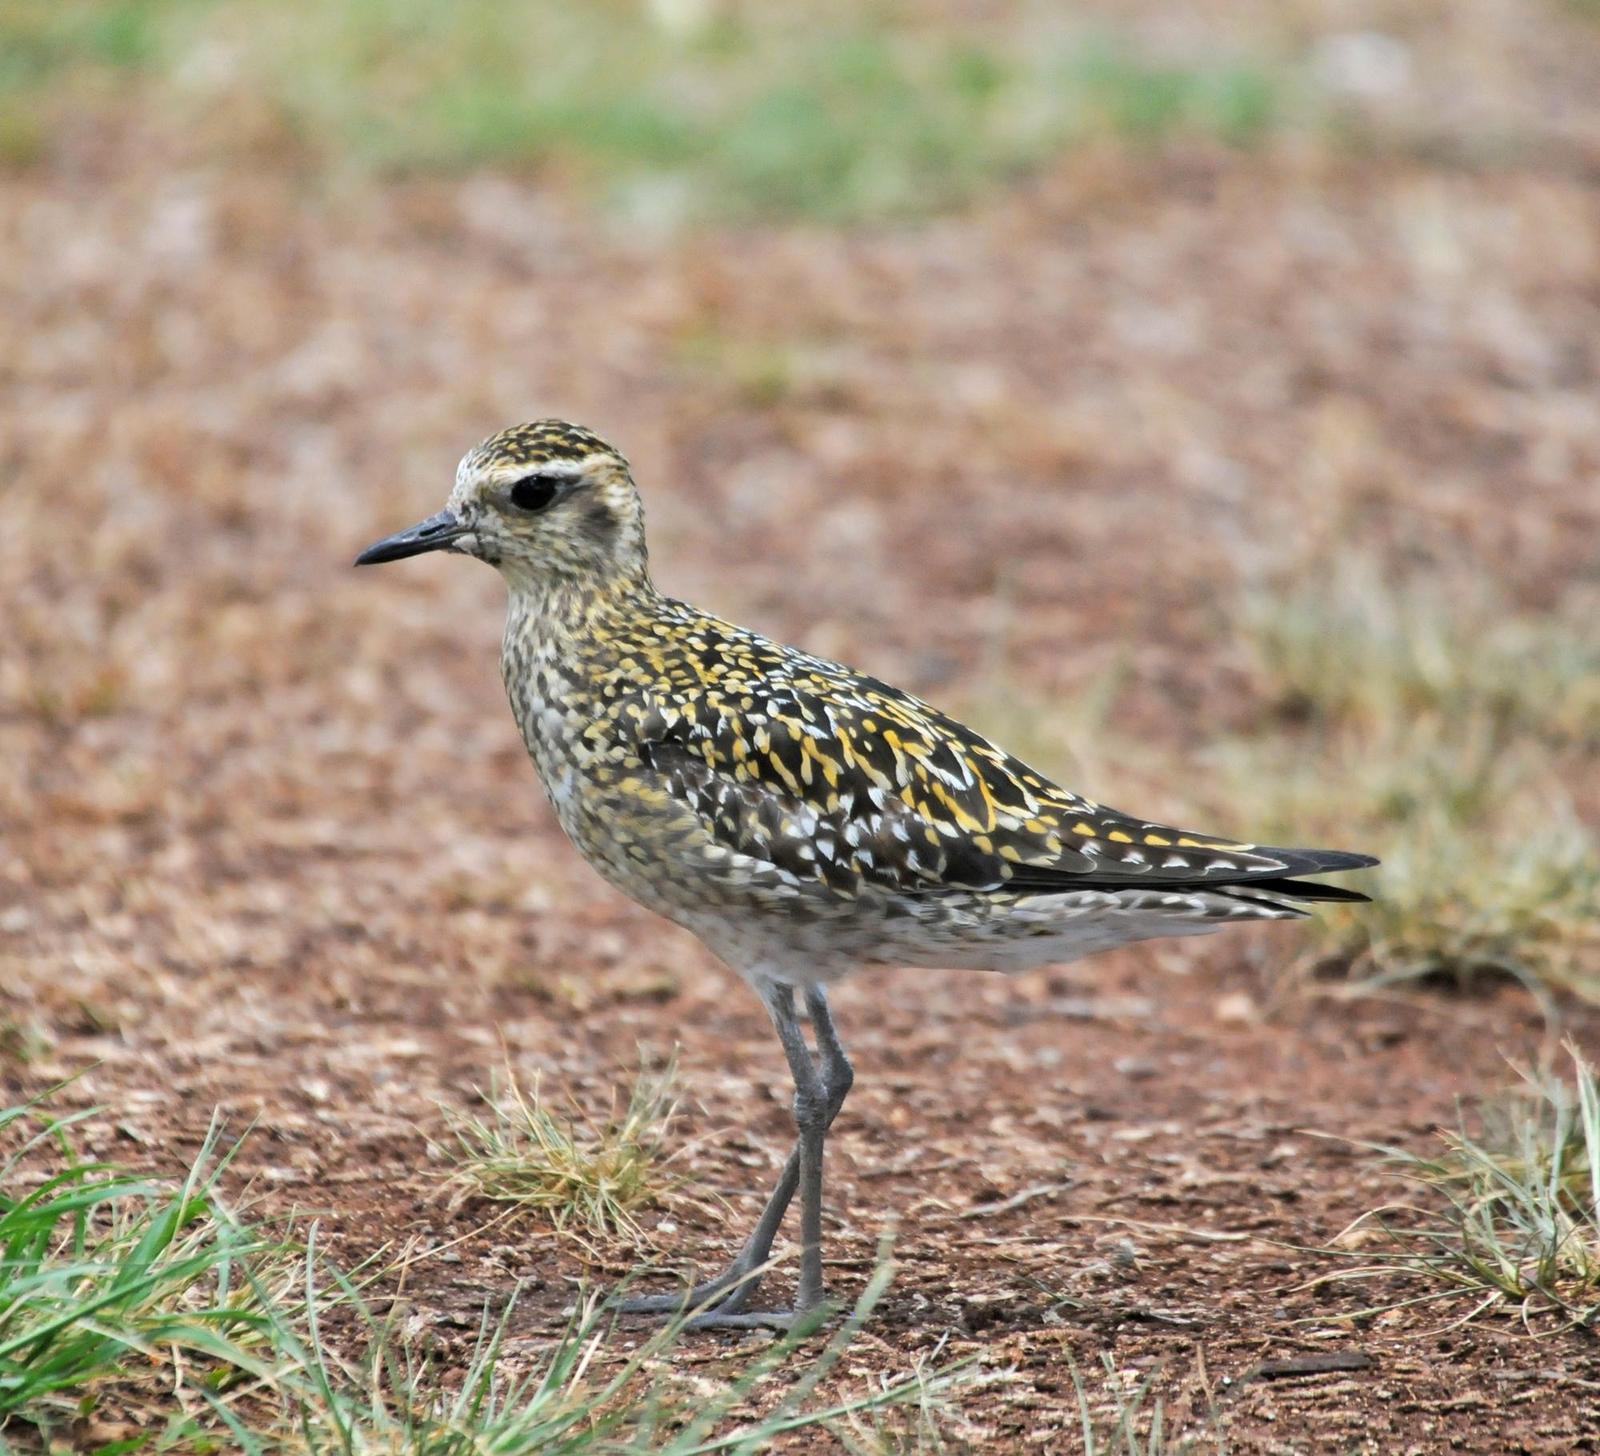 Pacific Golden-Plover Photo by Steven Mlodinow